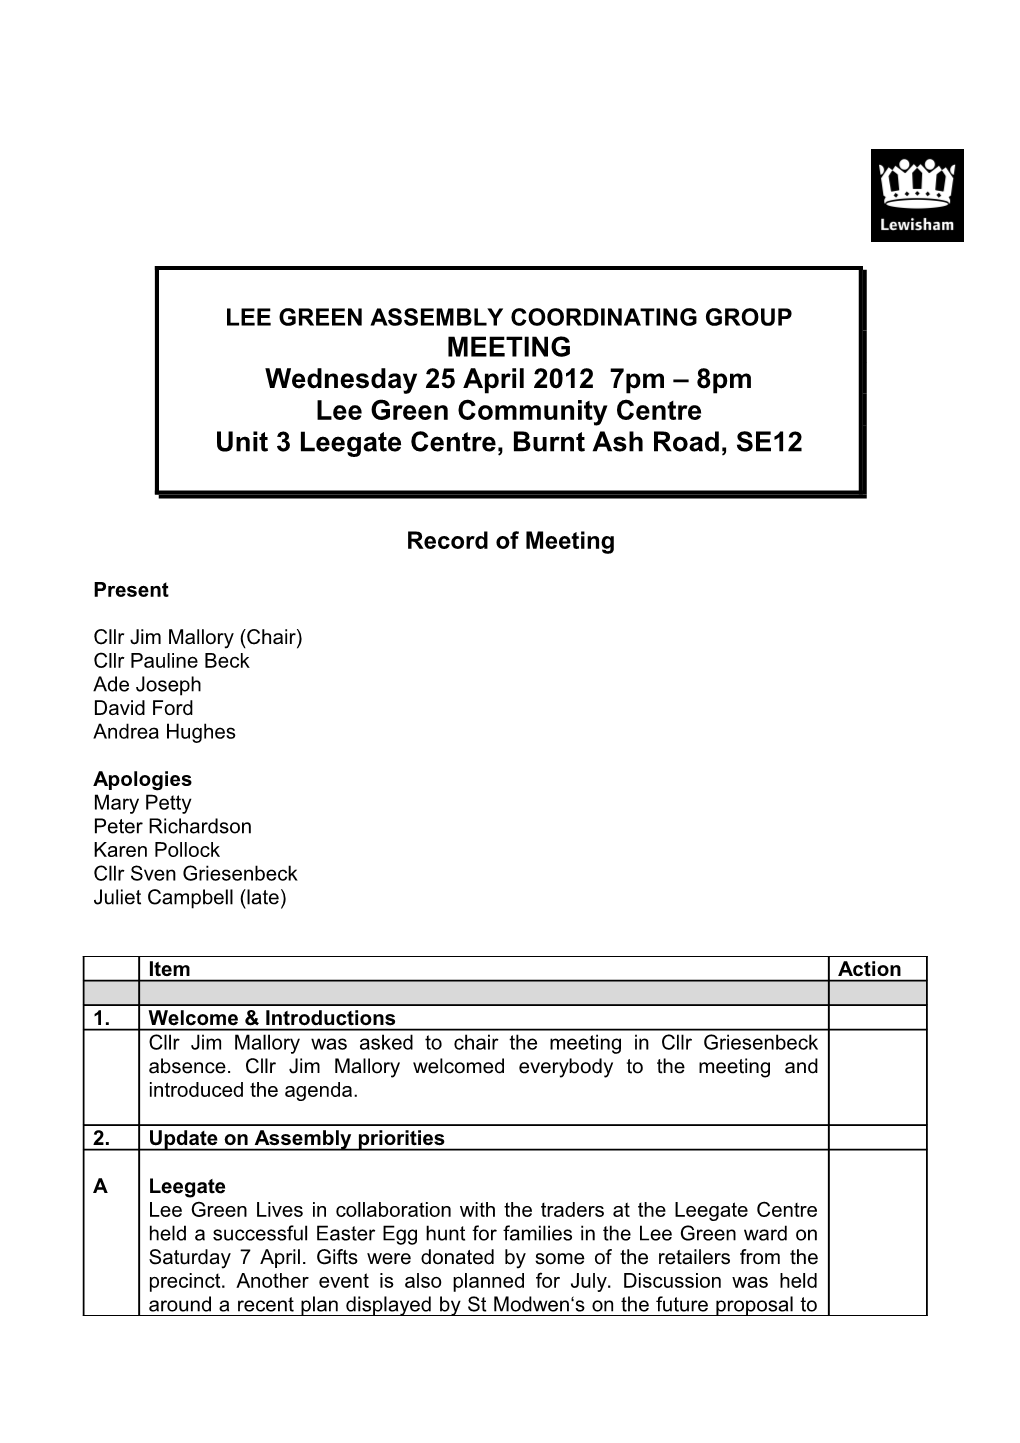 Lee Green Coordinating Group Meeting 25 April 2012 Minutes